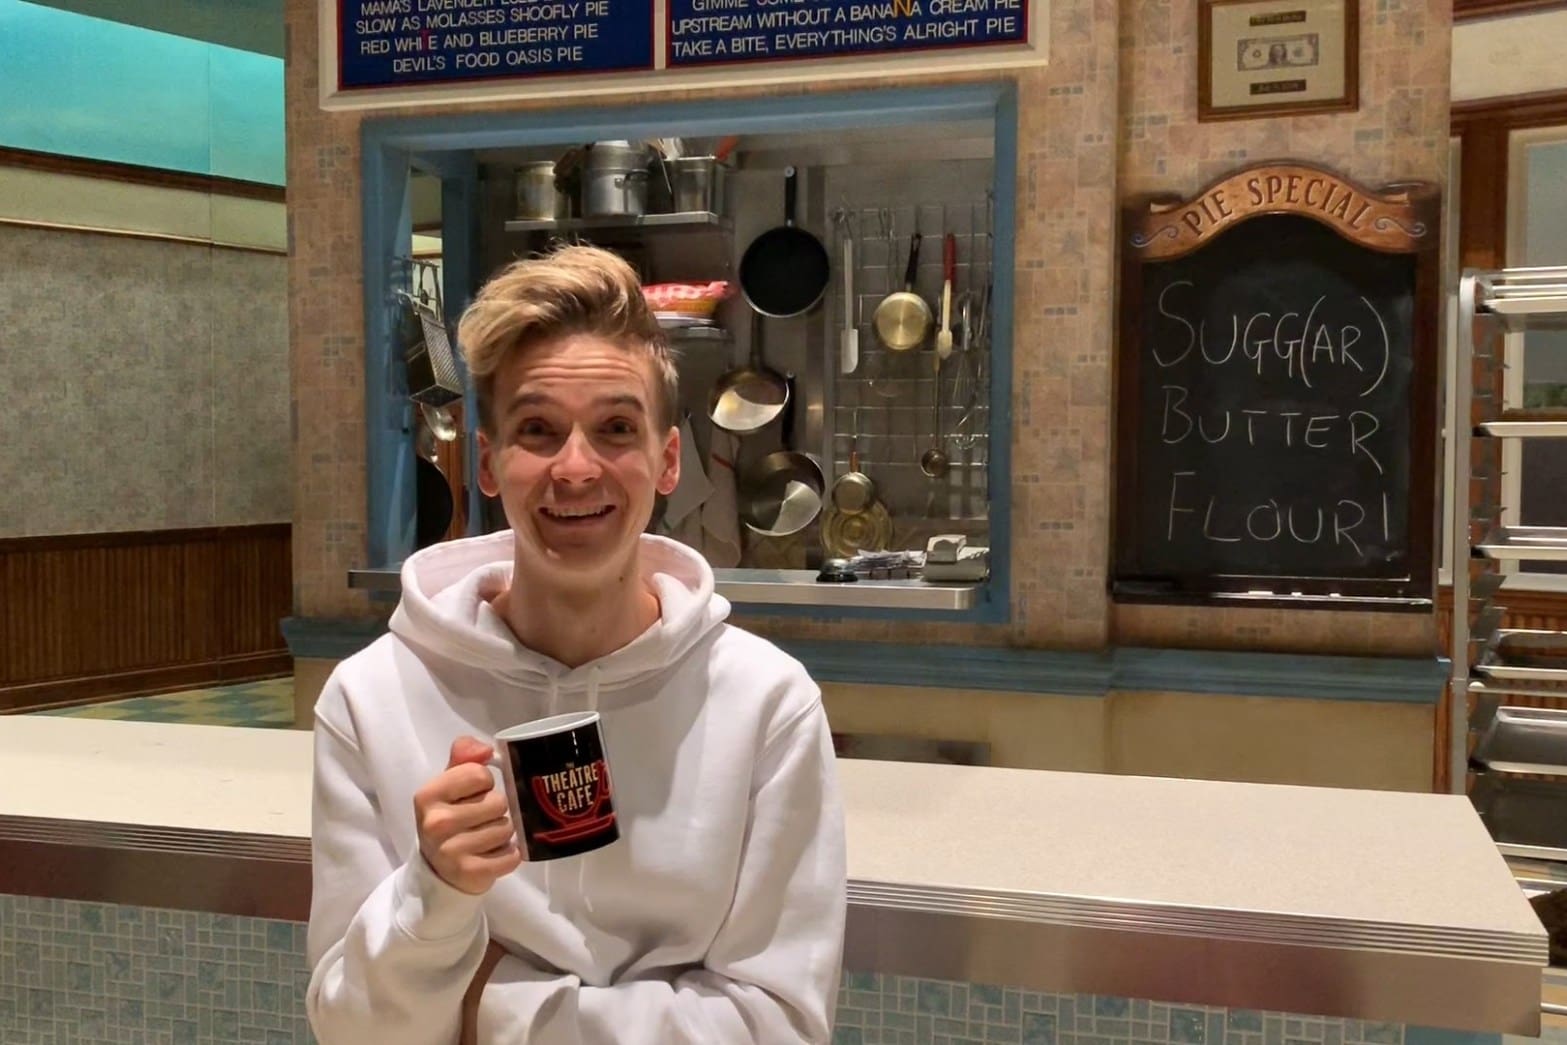 We had a quick cuppa with Waitress London’s new Ogie Joe Sugg